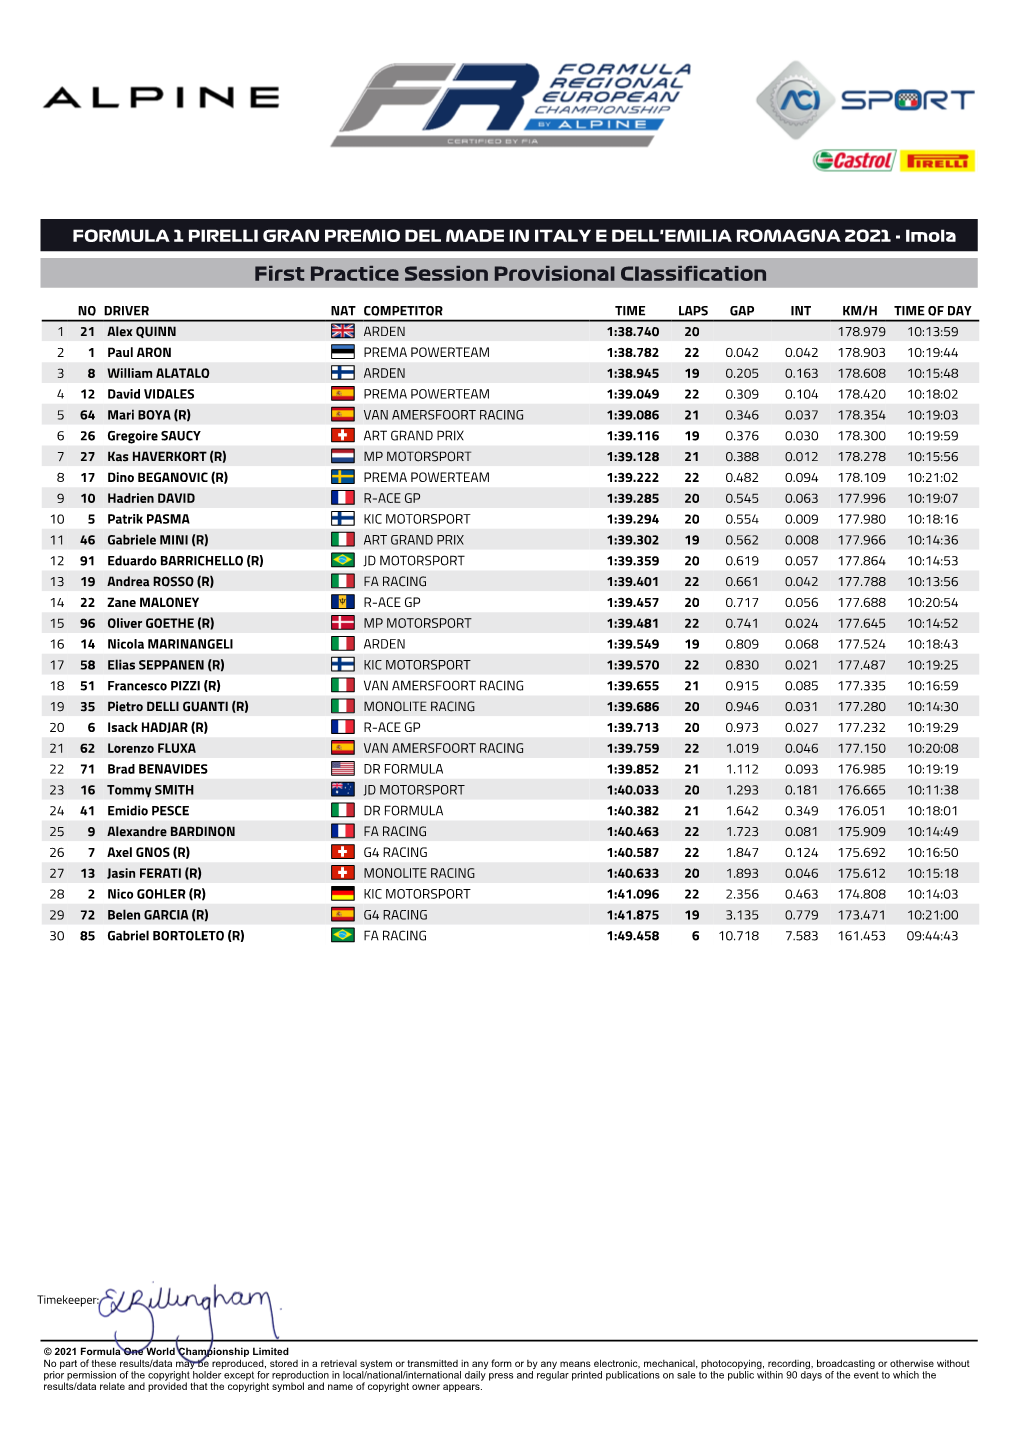 First Practice Session Provisional Classification